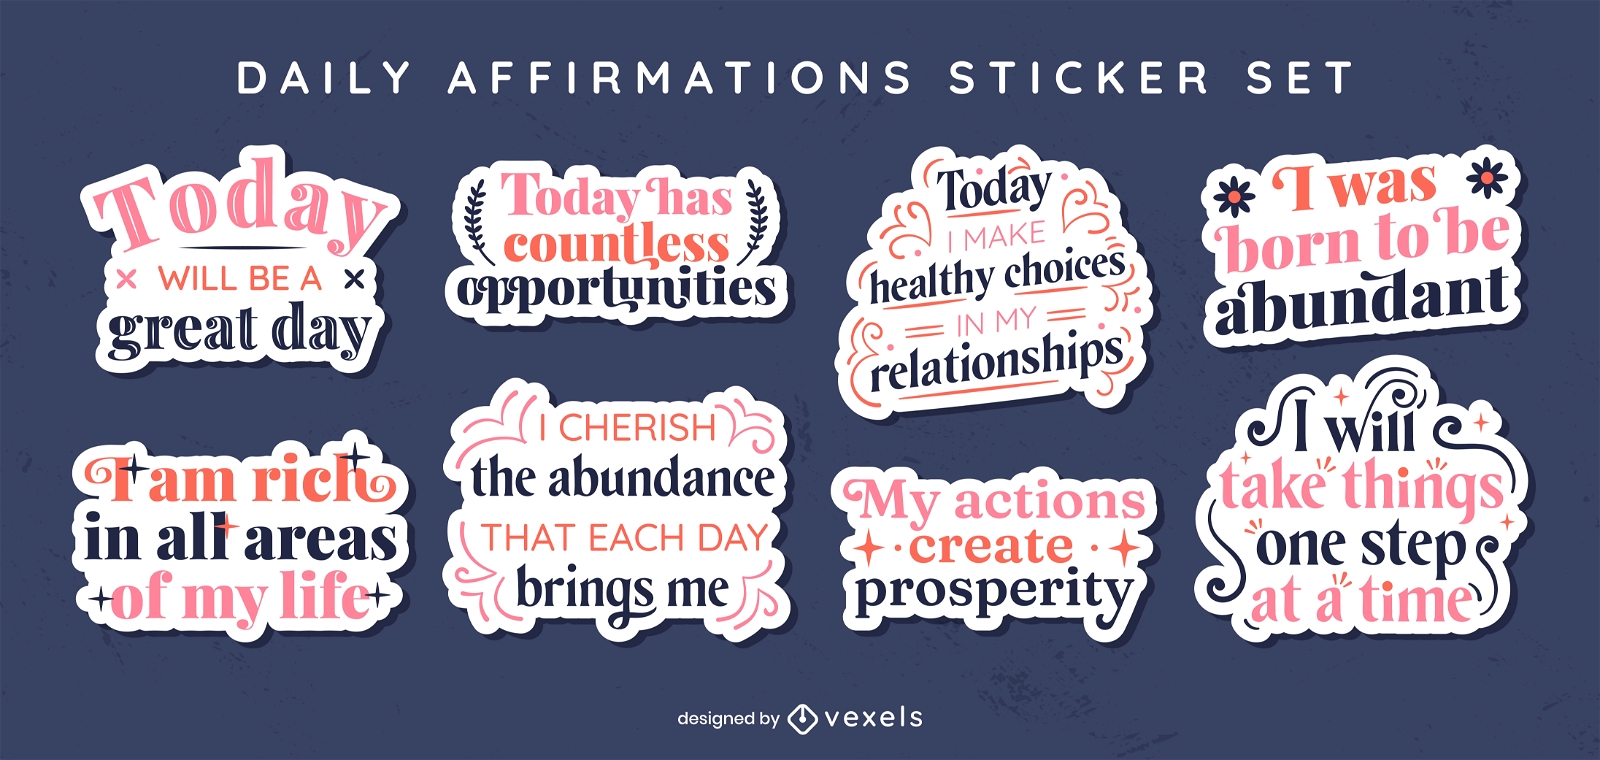 https://images.vexels.com/content/287385/preview/daily-affirmations-sticker-set-096927.png